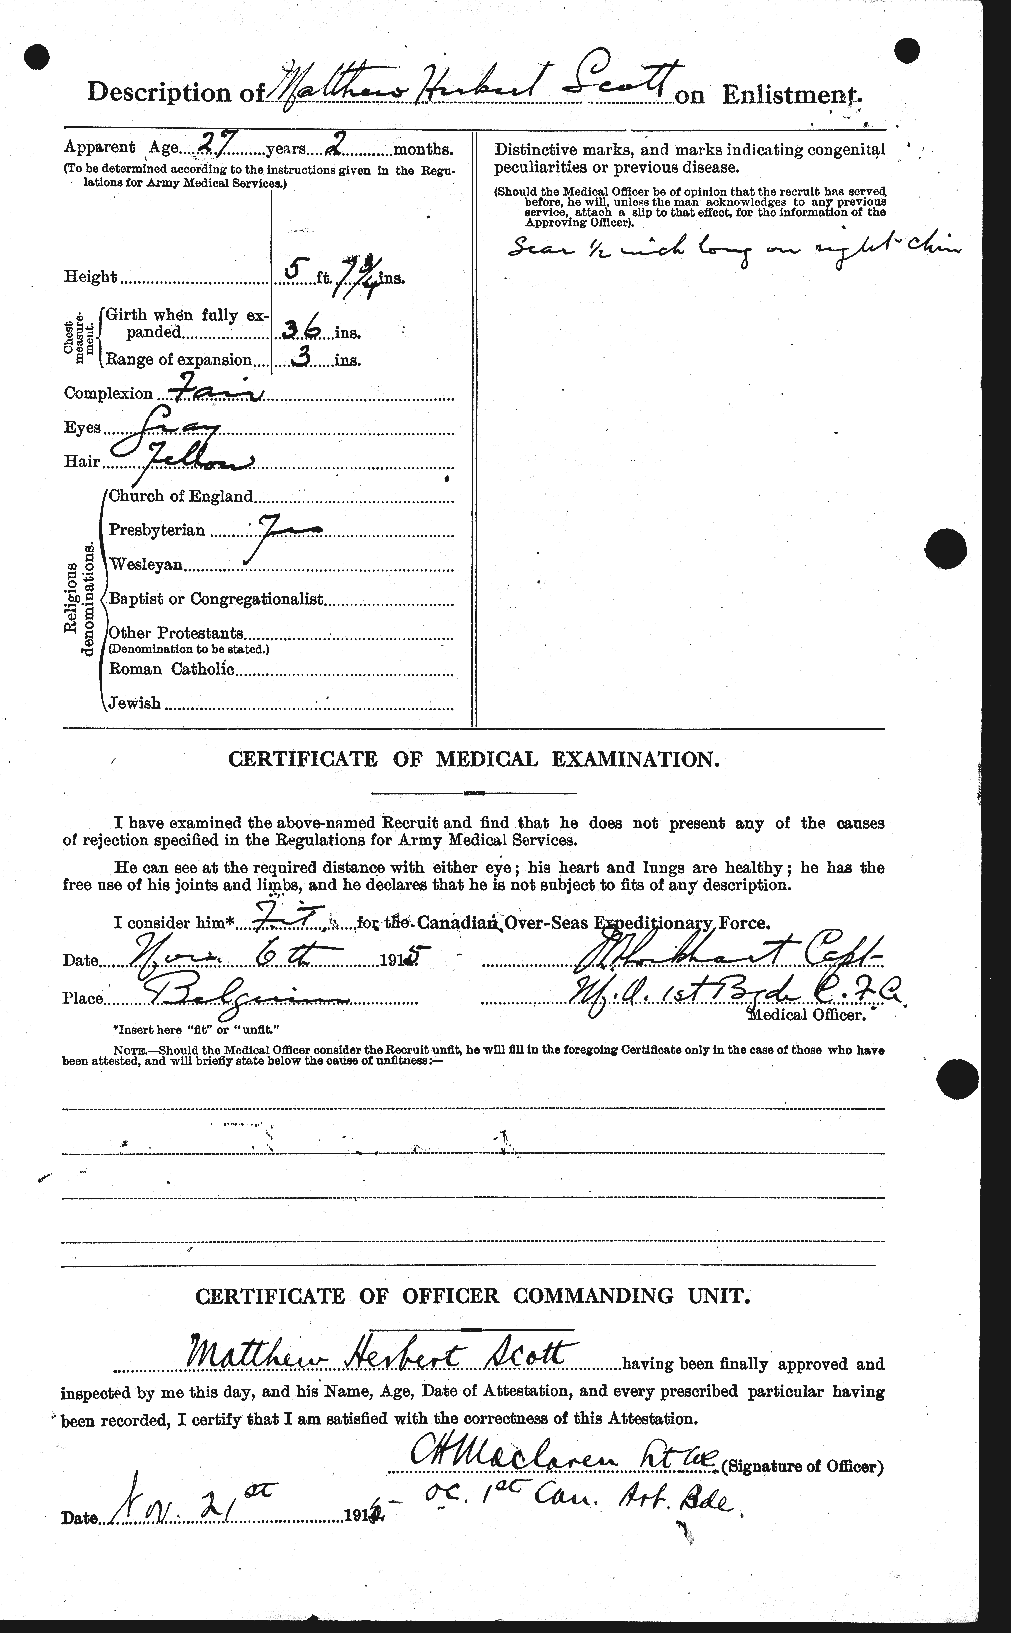 Personnel Records of the First World War - CEF 083503b